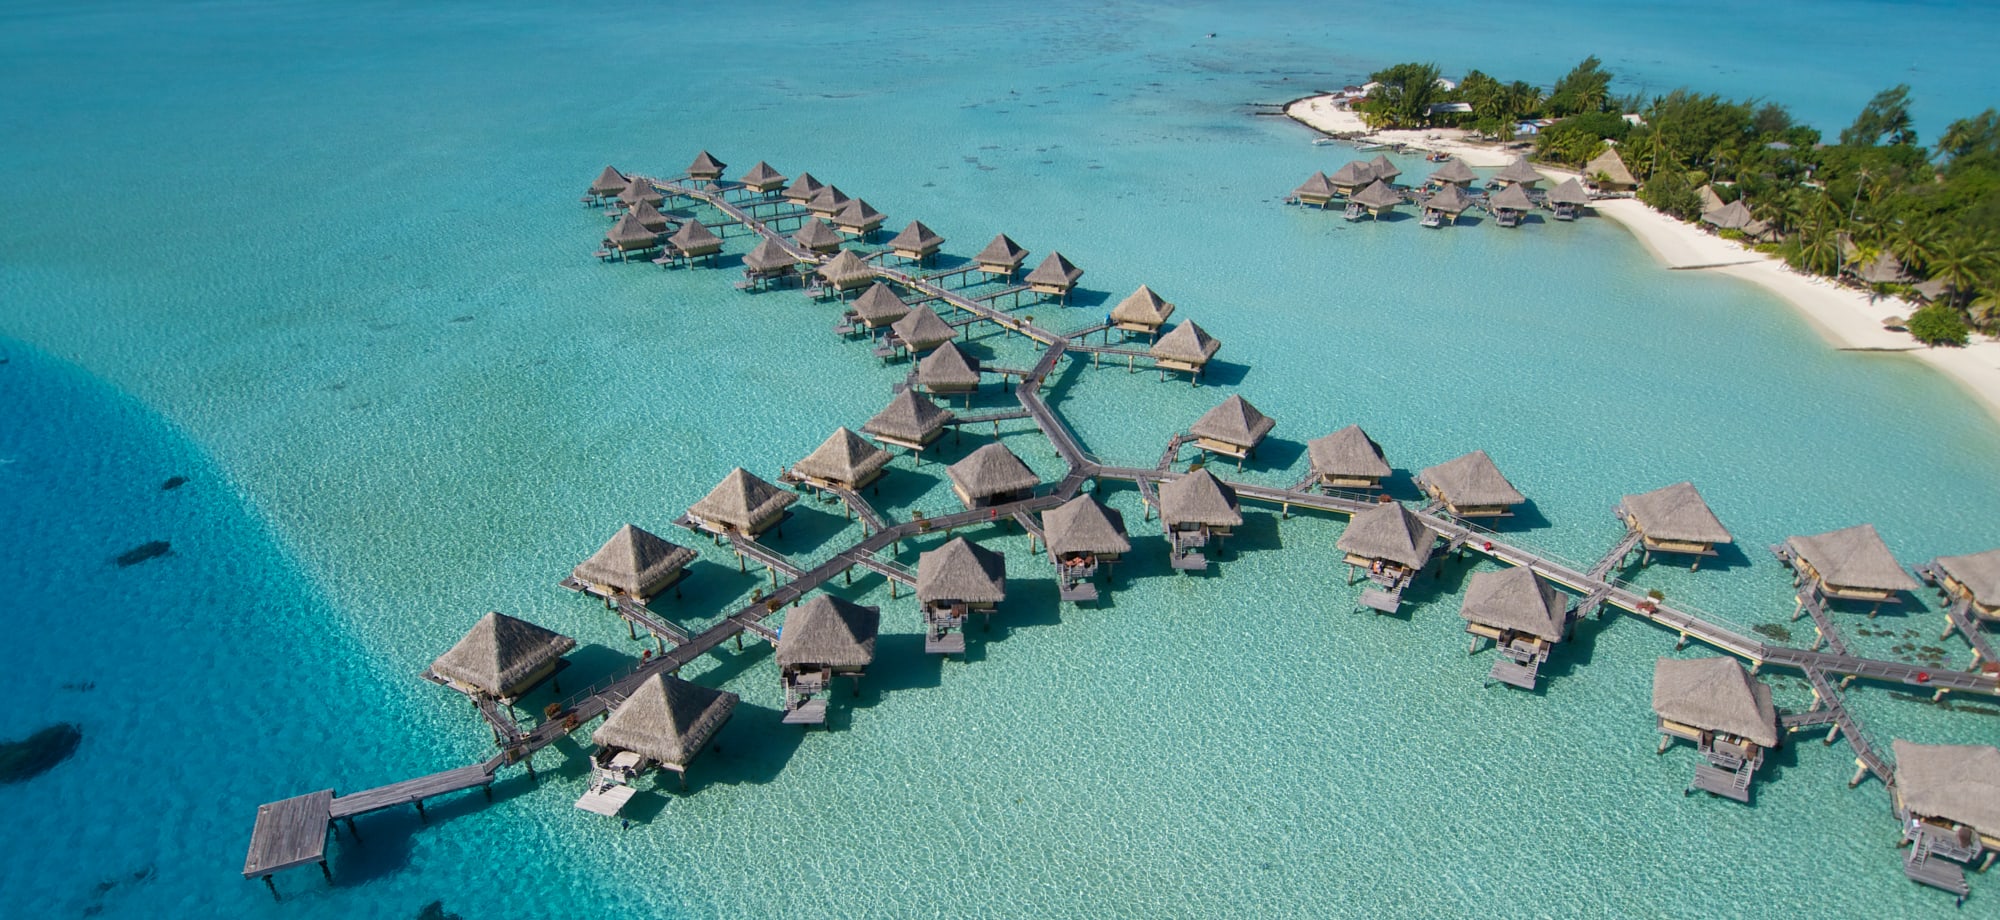 Overwater villas sit in the ocean and are backed by an island. 